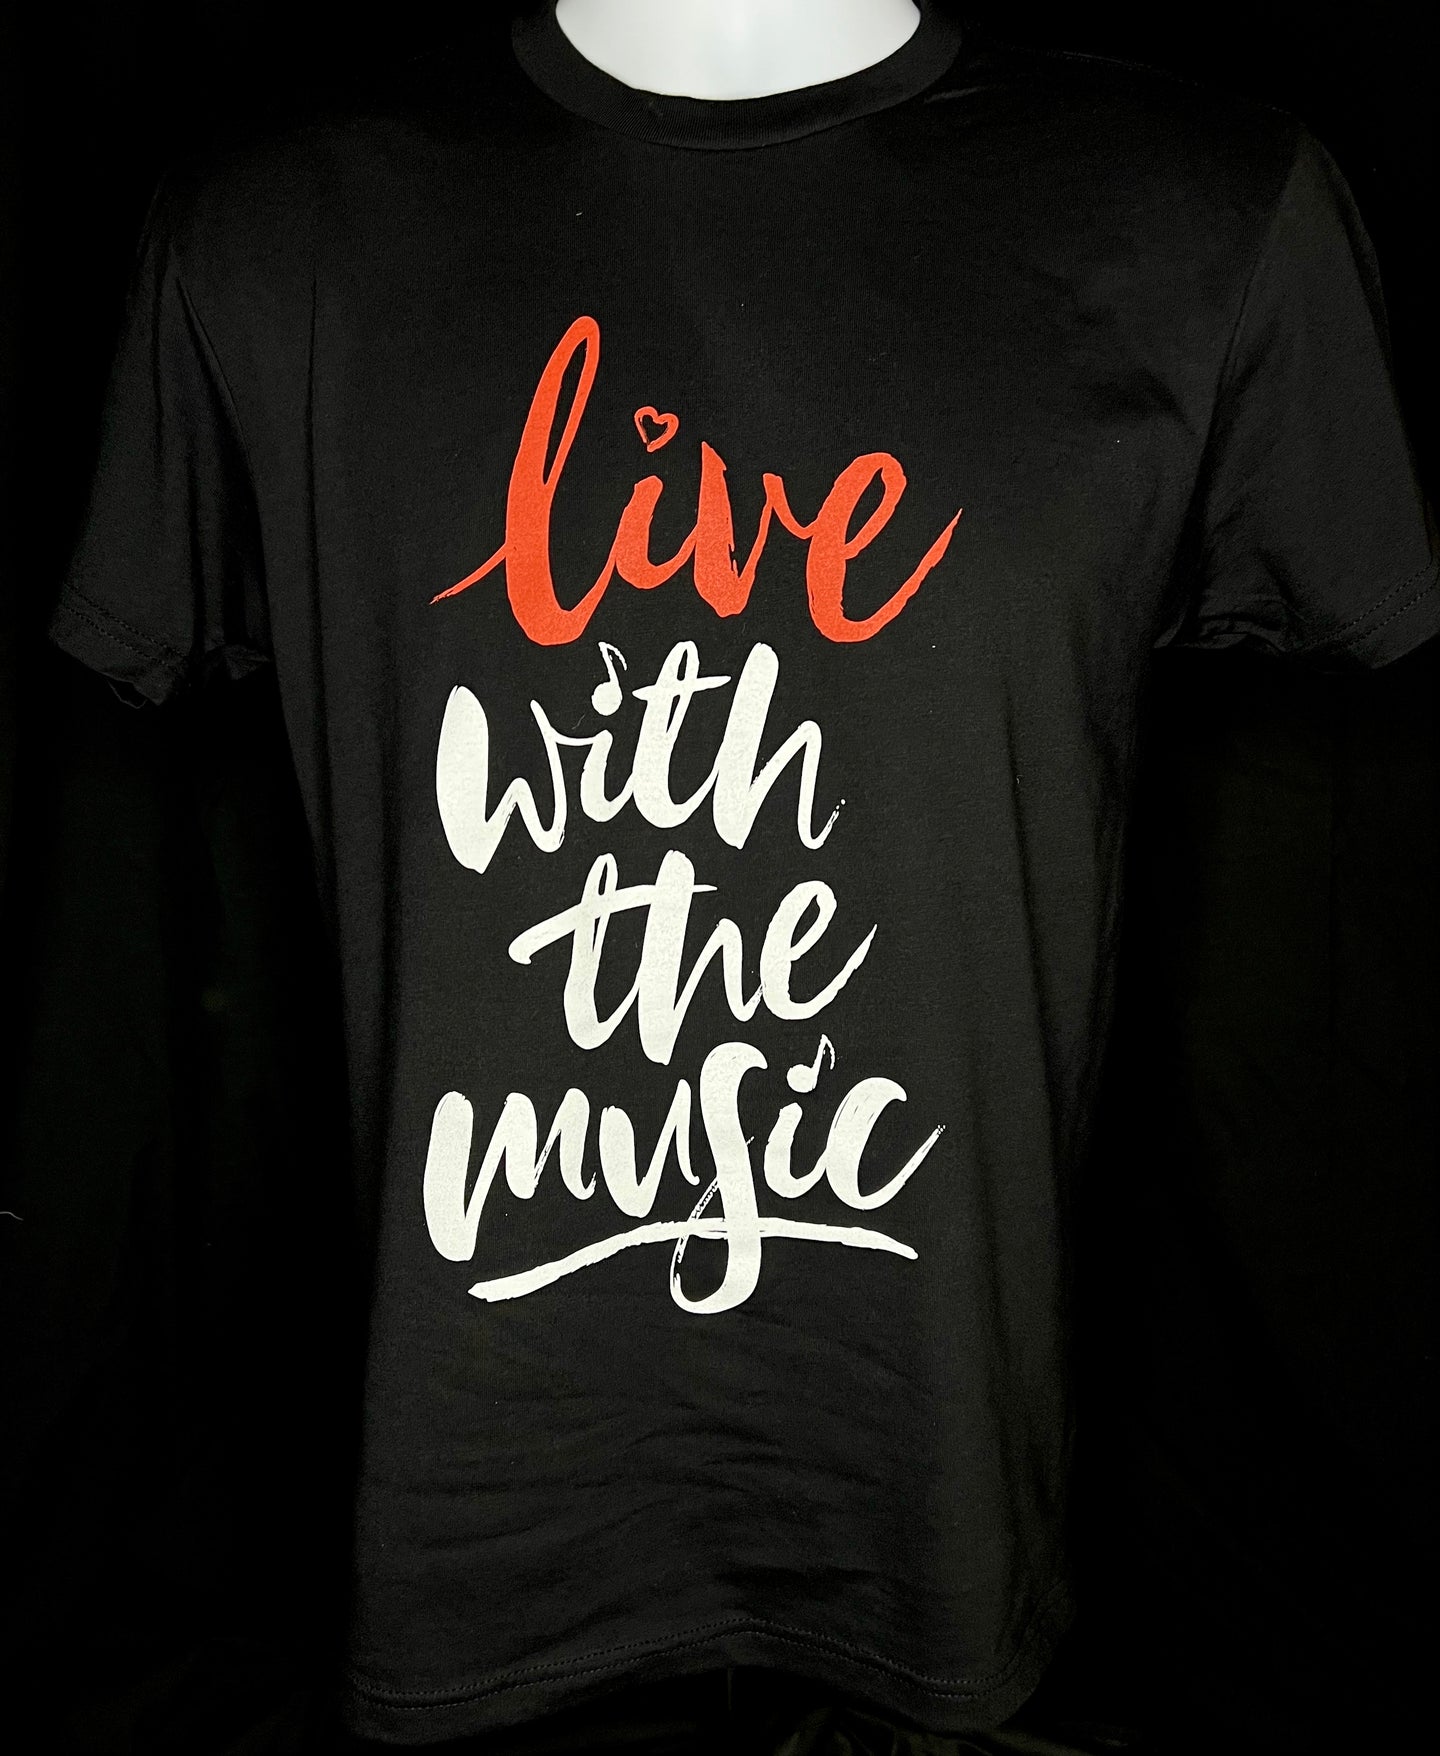 Live With the Music - Black T-Shirt (Unisex)